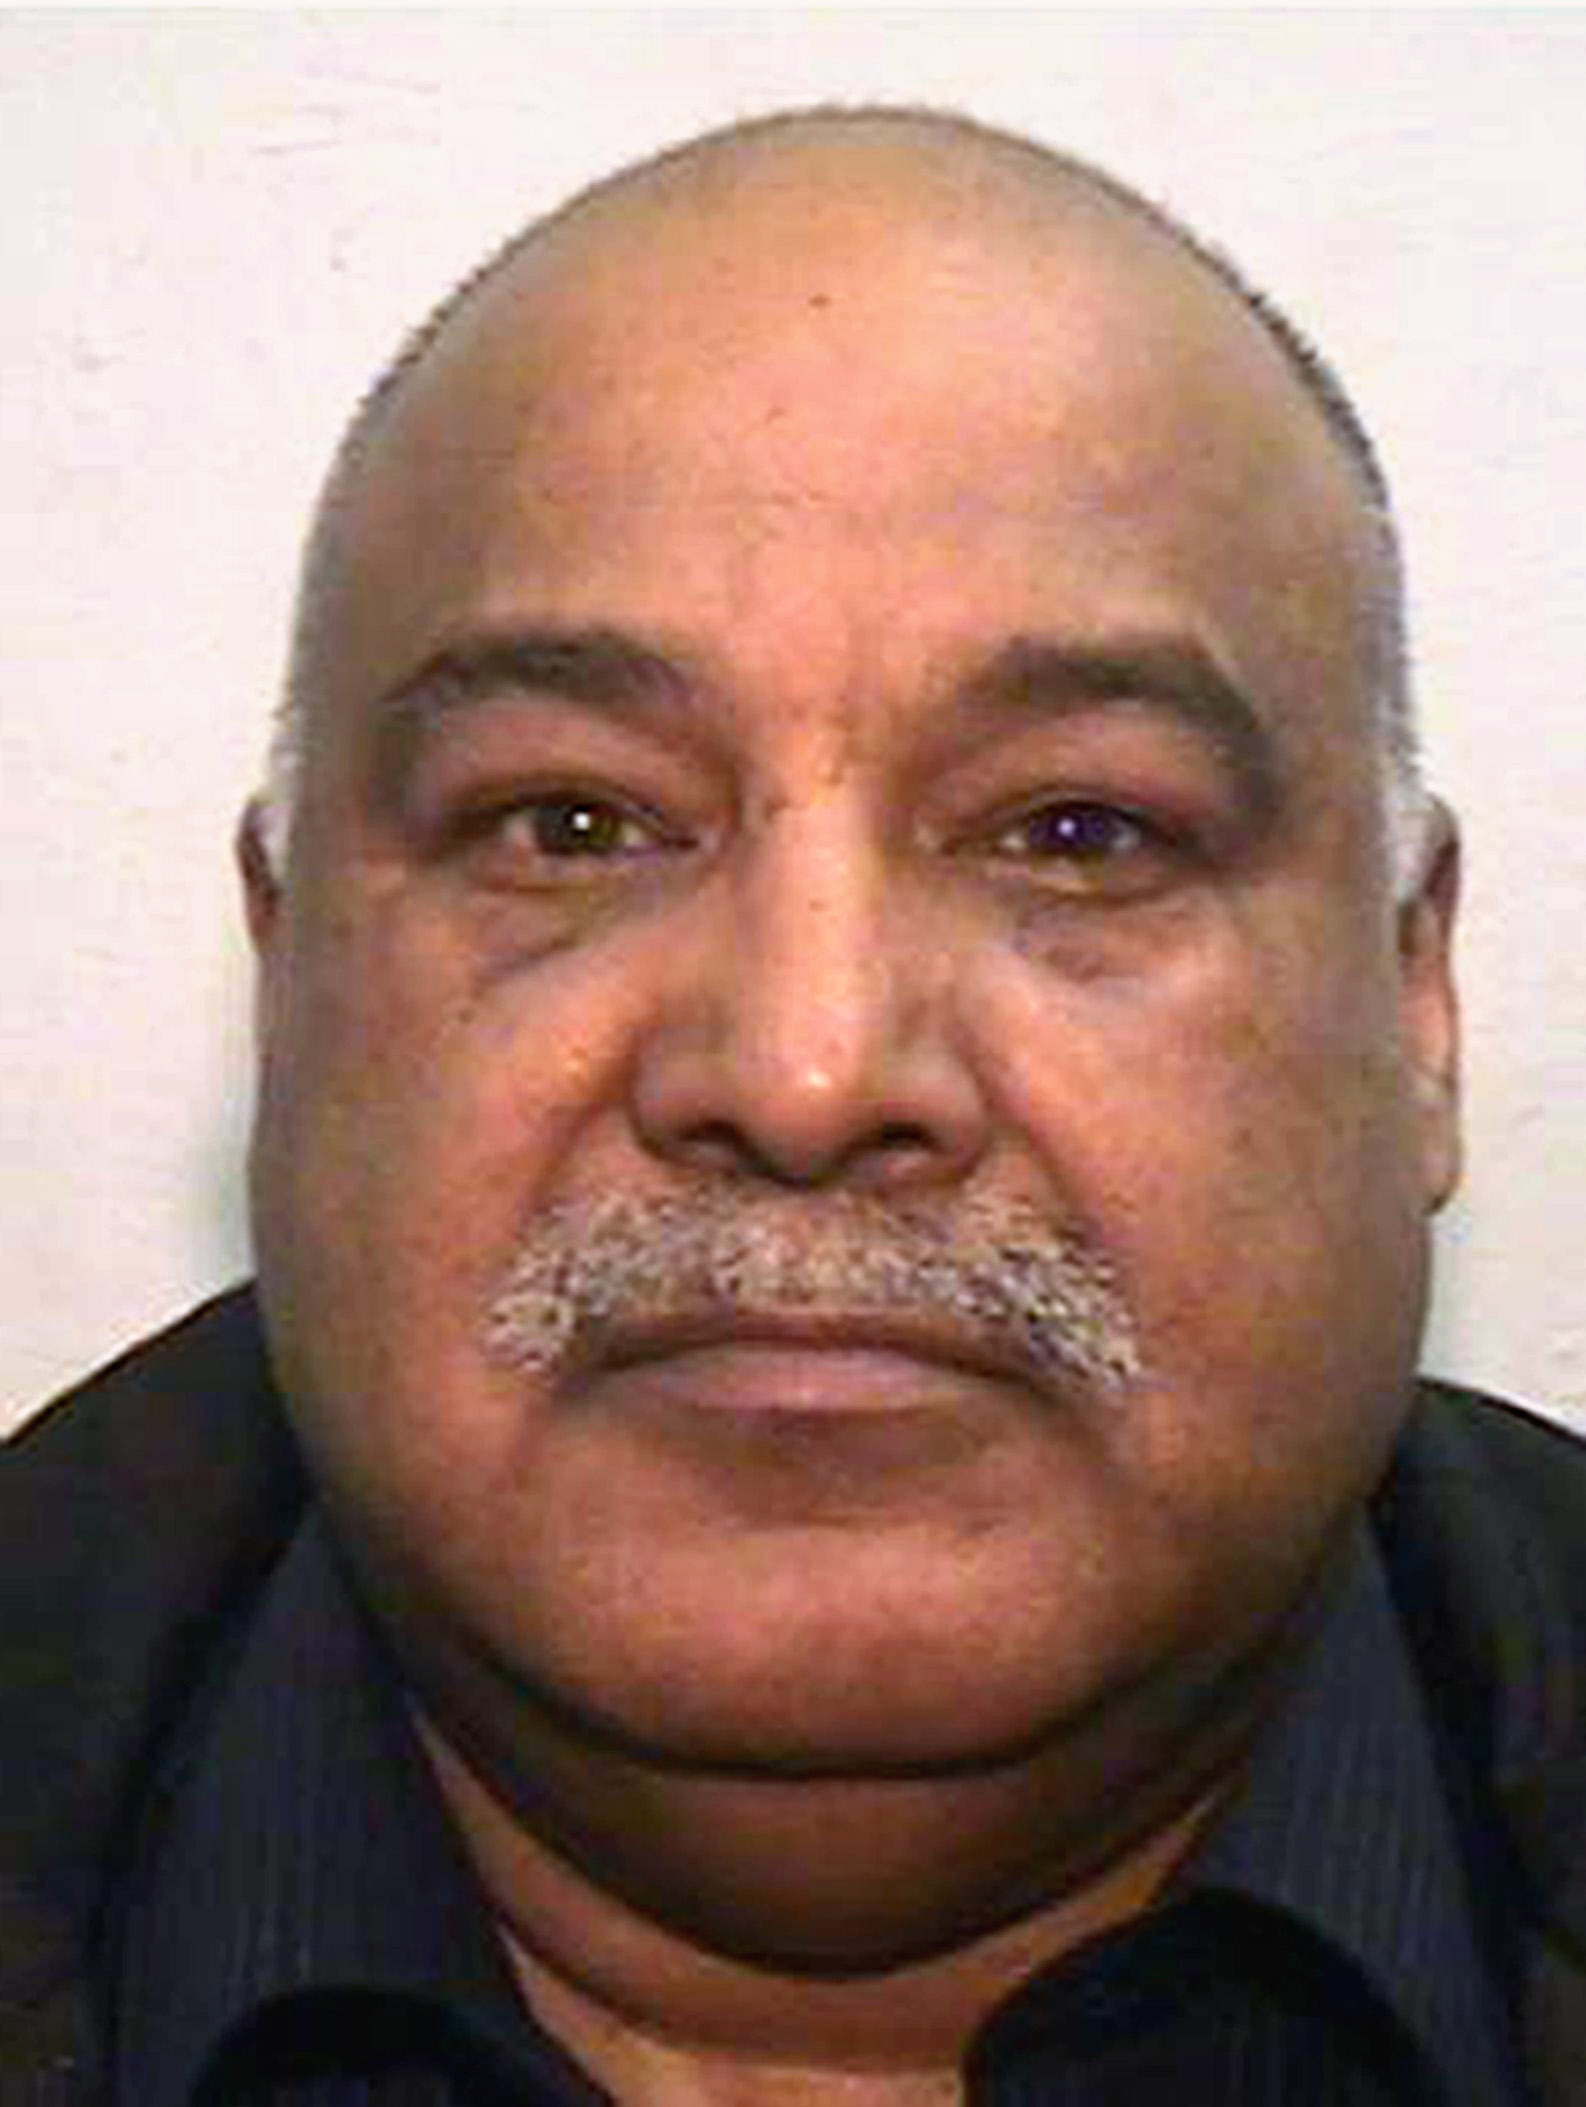 Rochdale ringleader Shabir Ahmed had been given a job as a council welfare rights officer